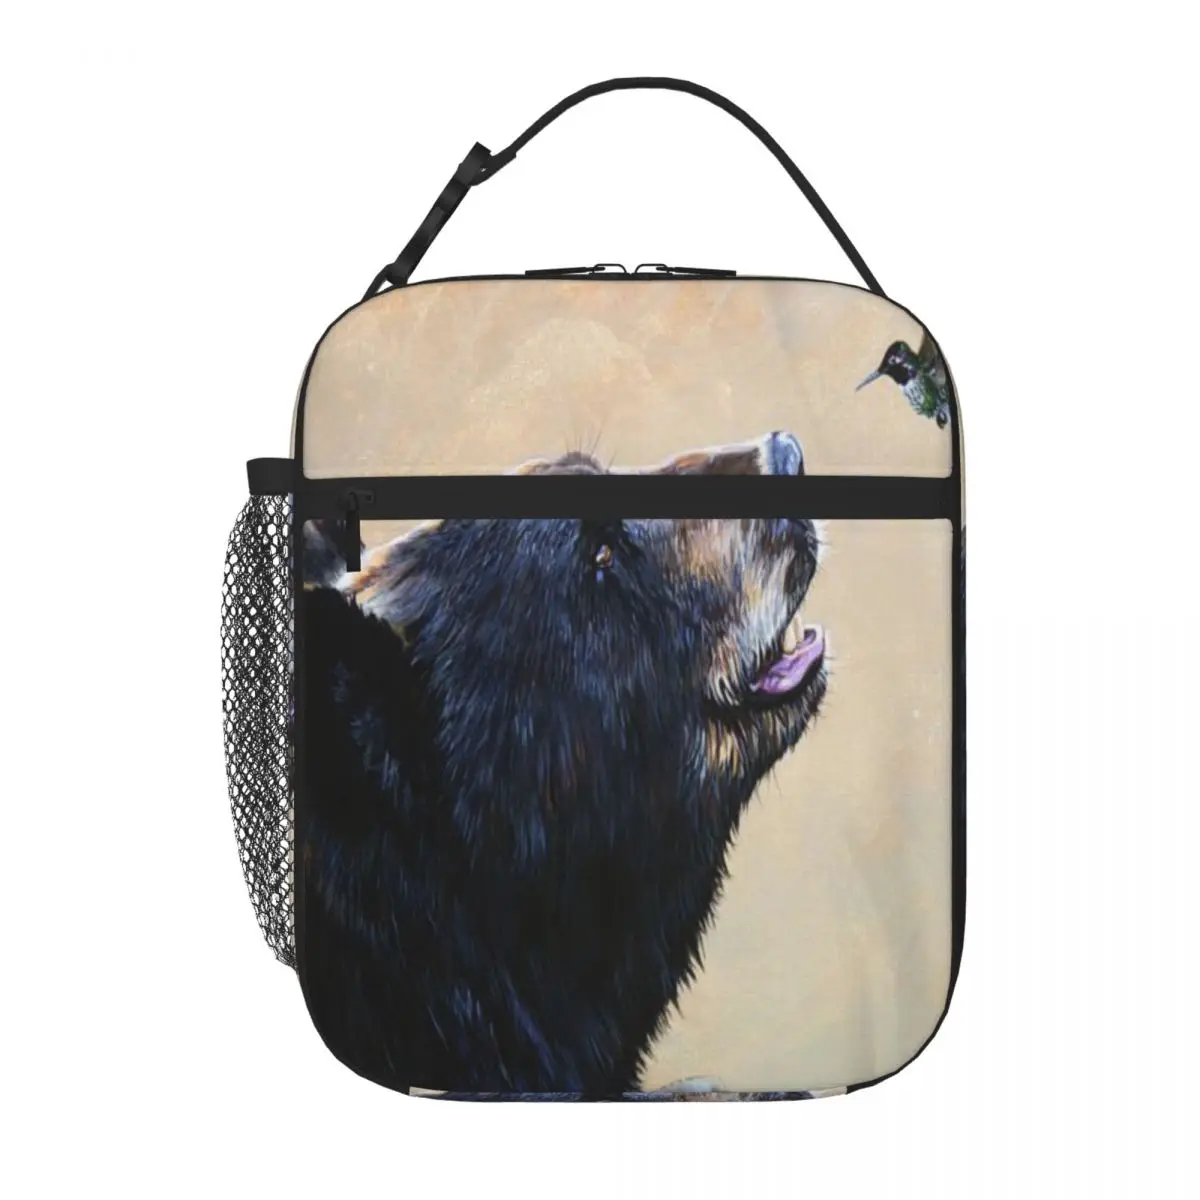 

The Bear And The Hummingbird J W Baker Lunch Tote Lunch Boxes Insulated Bag Thermo Cooler Bag